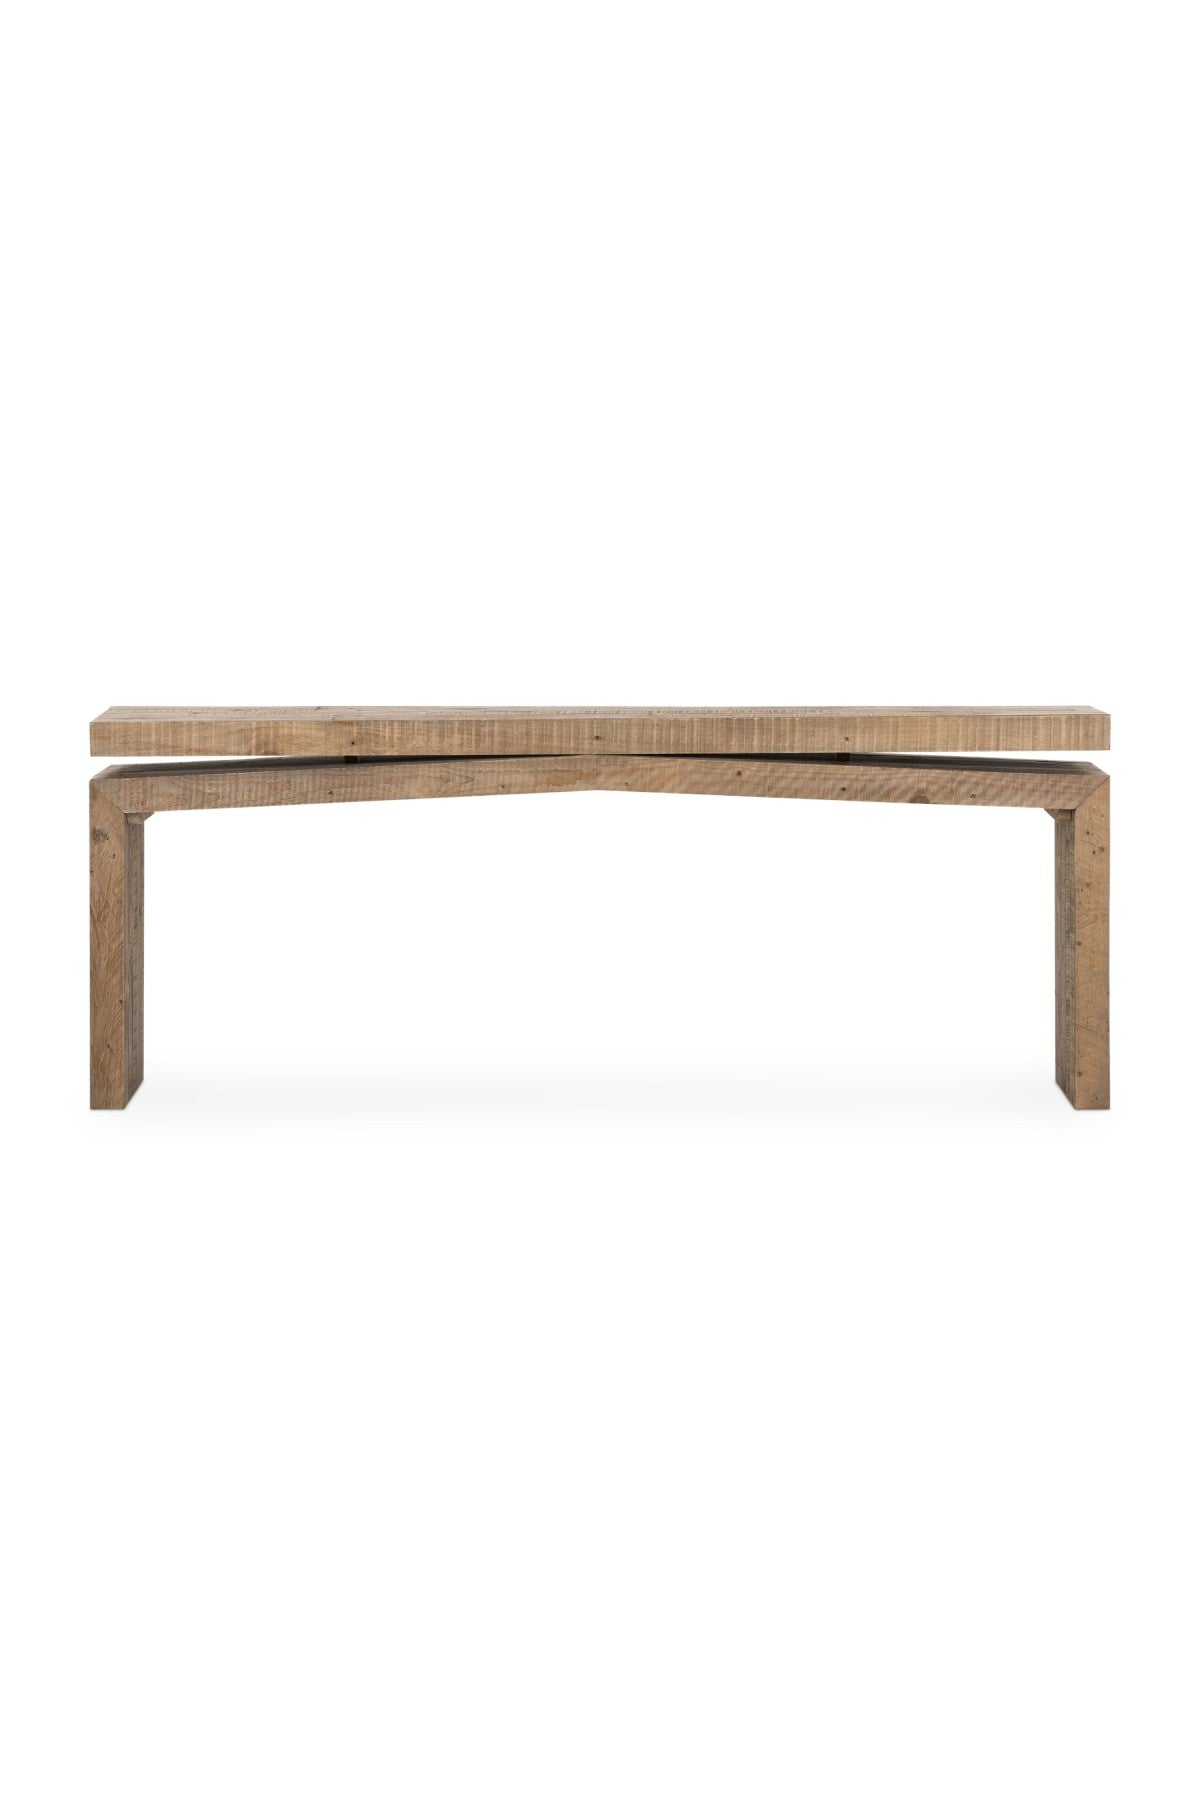 Mathis Console Table - Rustic Natural